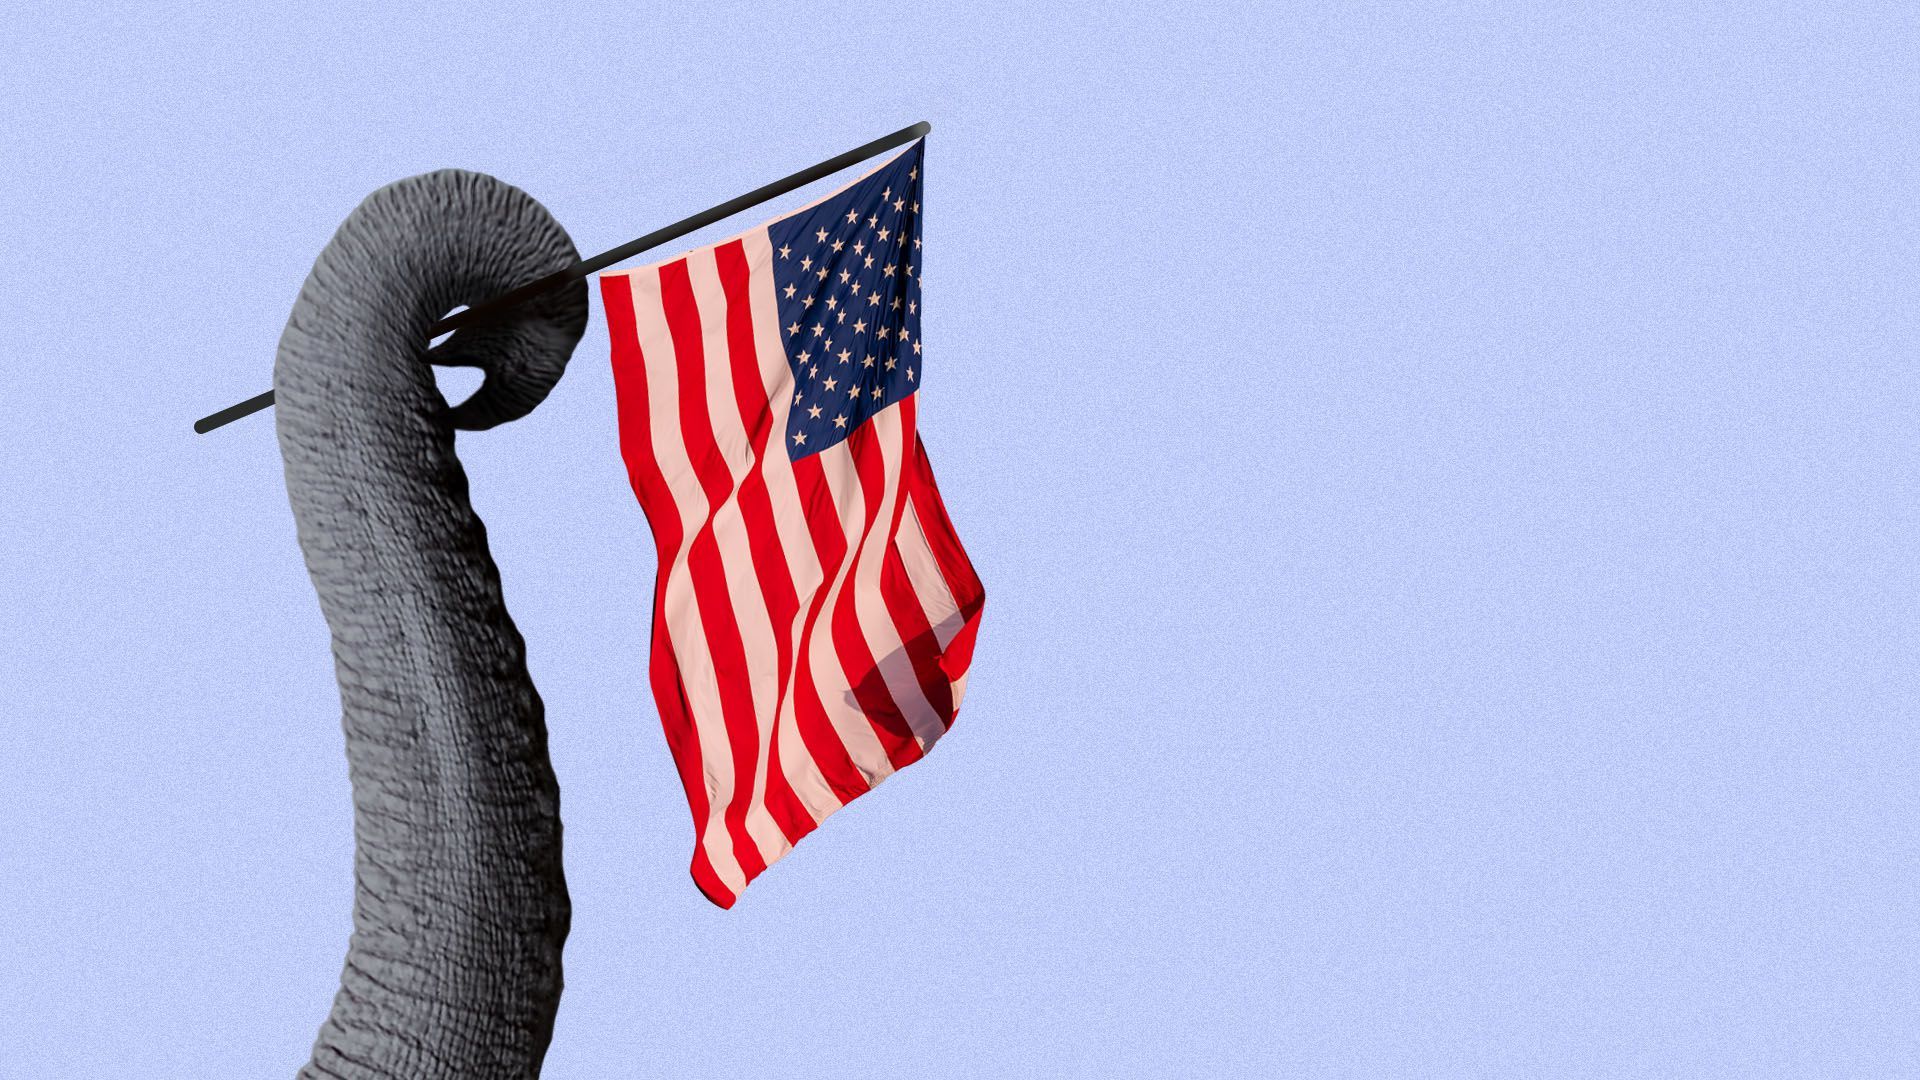 Illustration of an elephant trunk holding an American flag